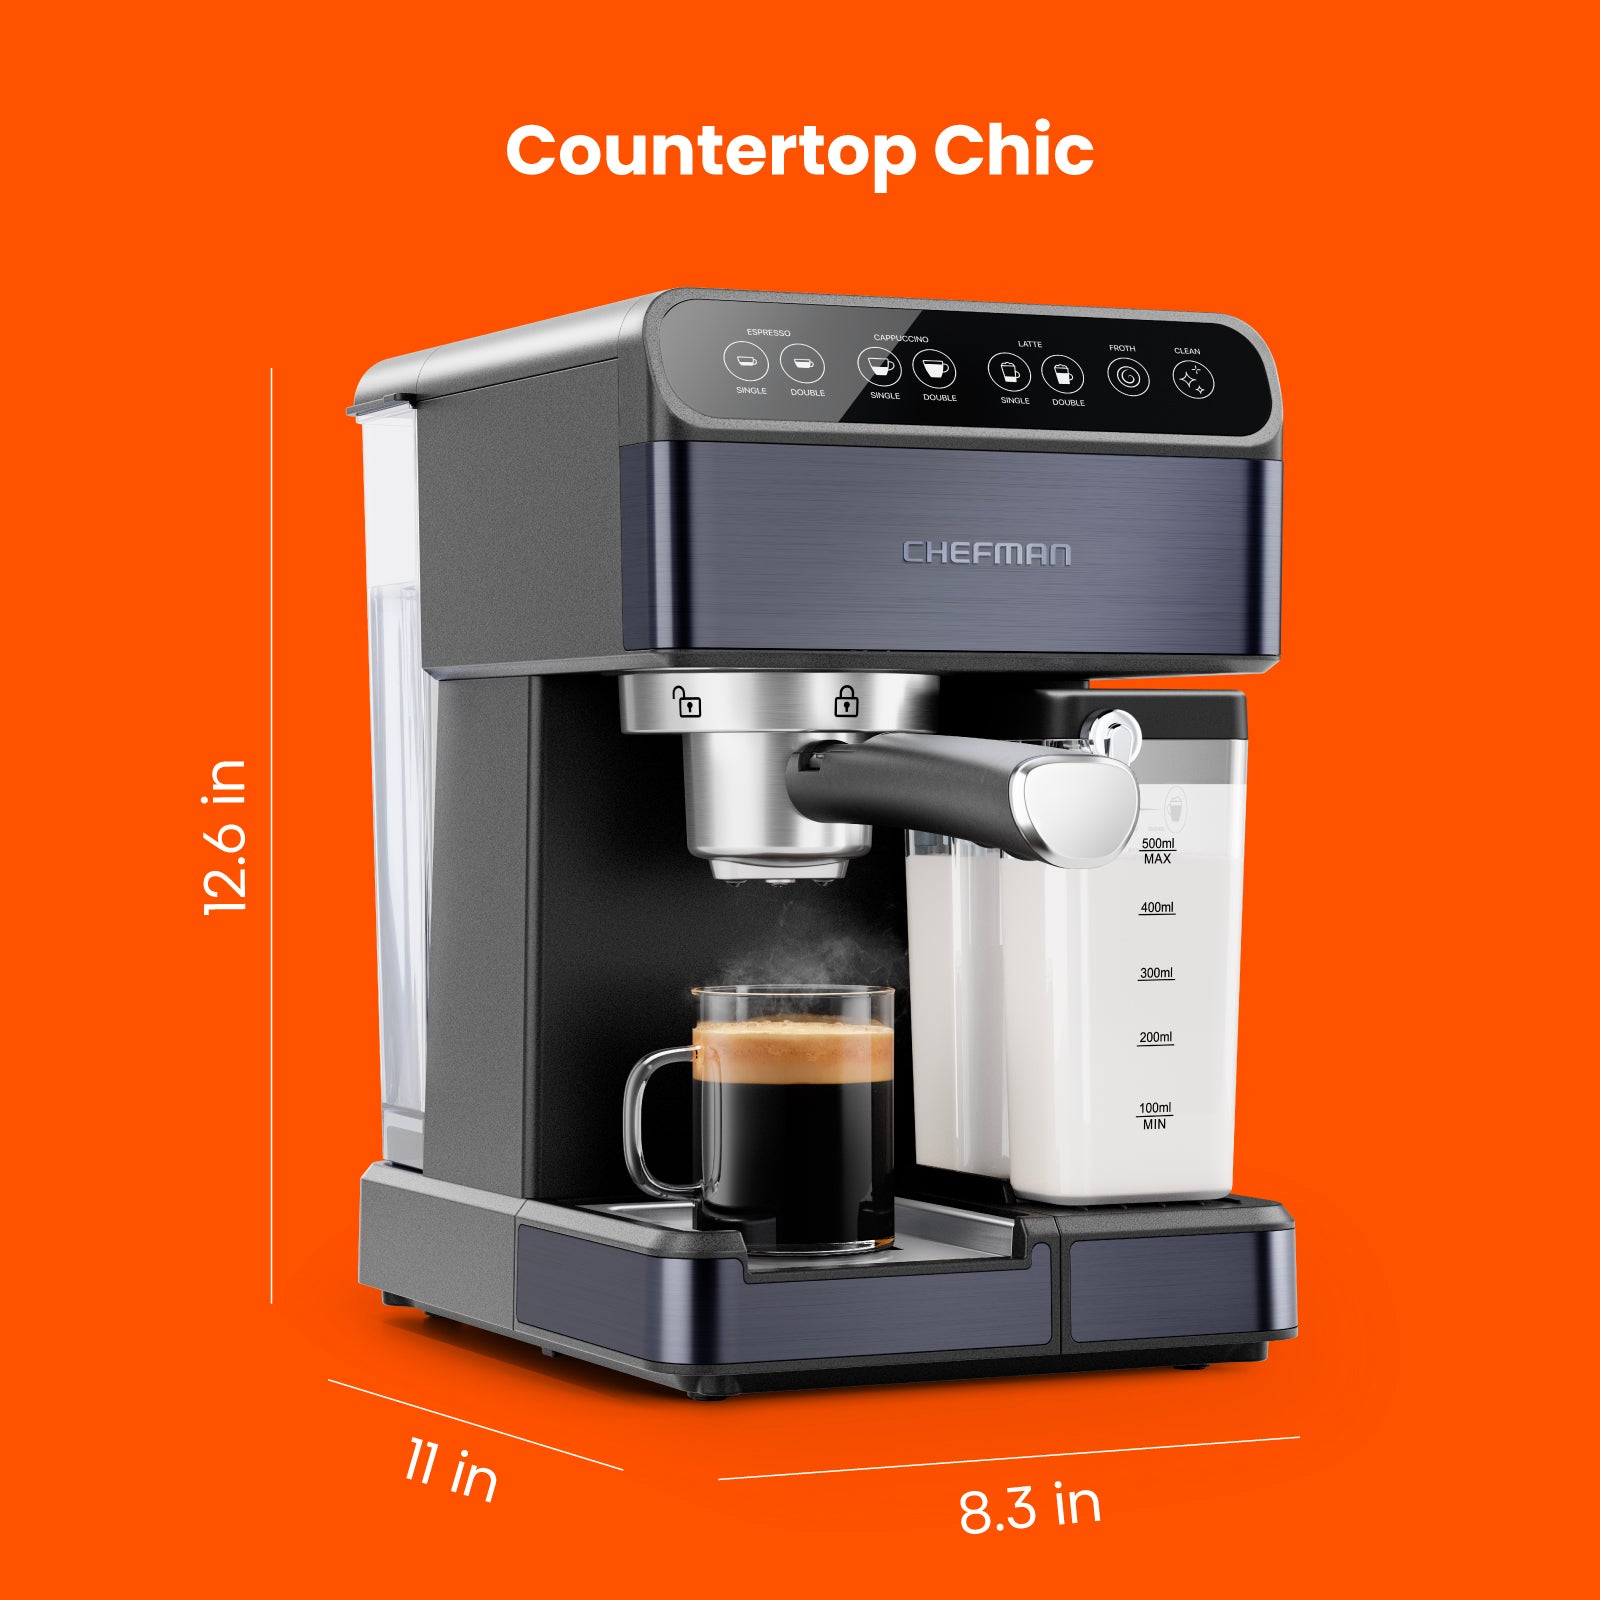 Chefman 6-in-1 Espresso Machine with Built-In Milk Frother, 15-BAR Pump,  Digital Display, One-Touch Single or Double Shot for Cappuccinos and  Lattes